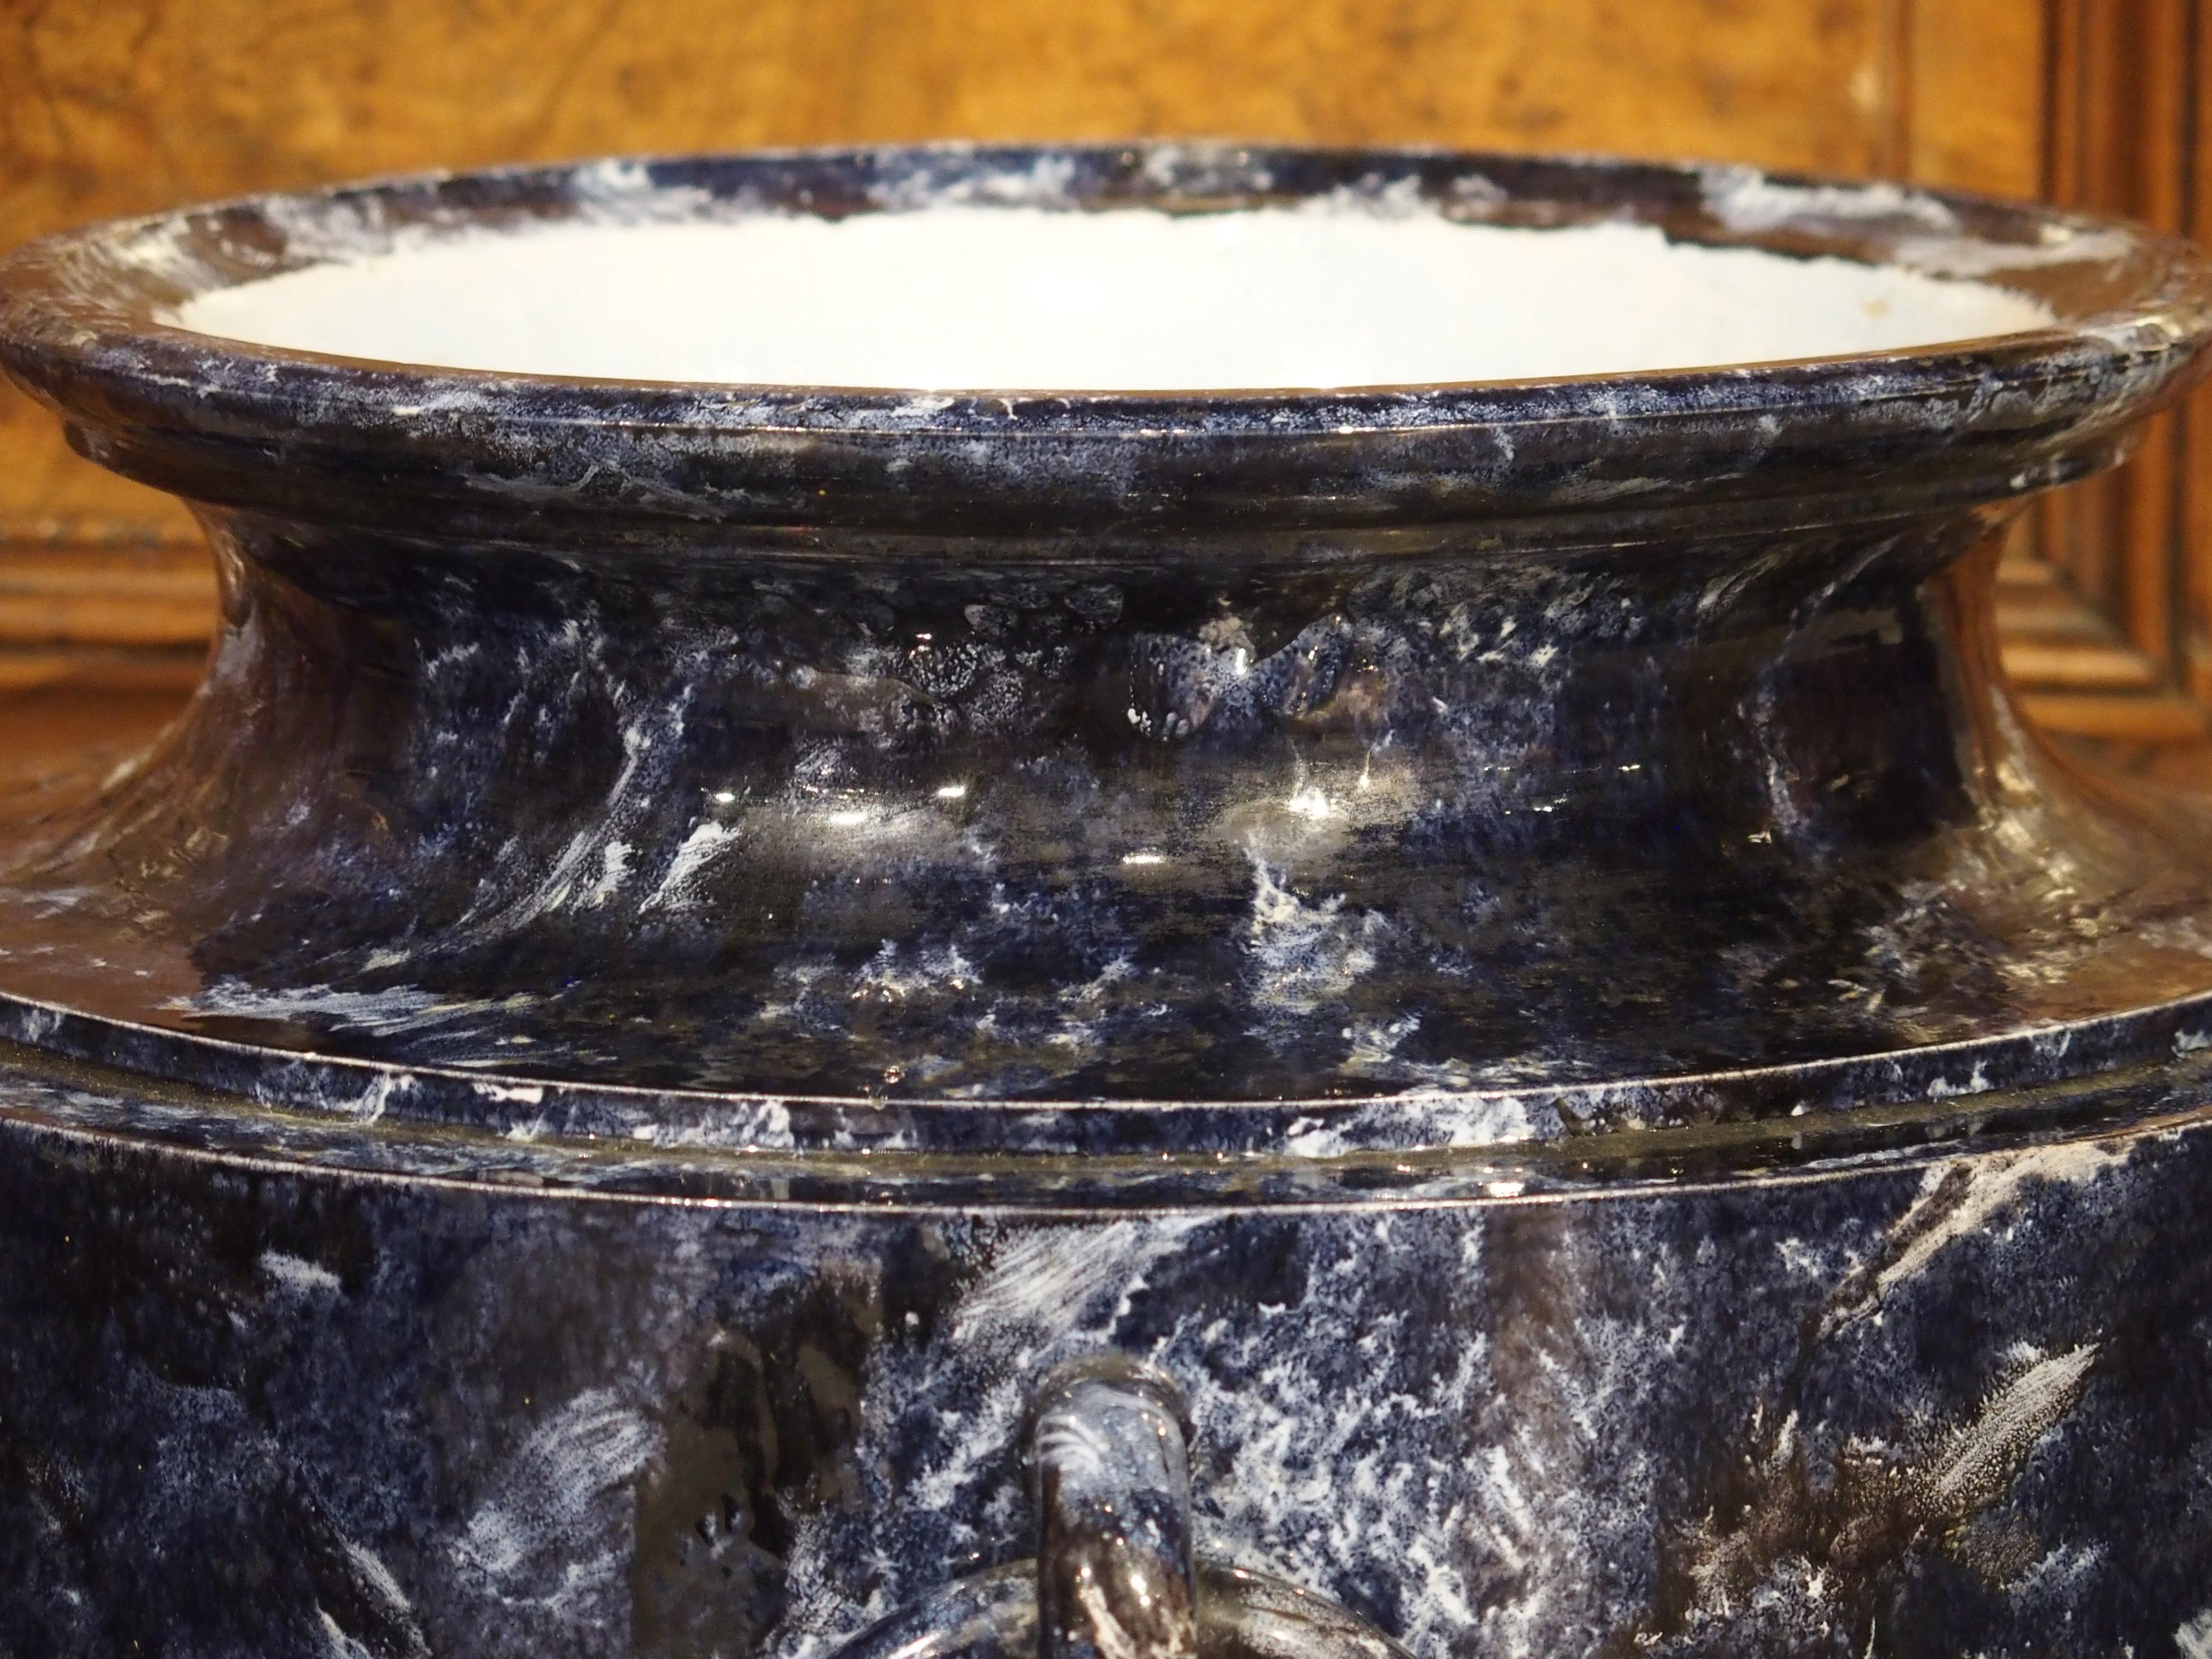 From Sèvres, France, this lovely porcelain vase has been hand painted in a faux blue marble with black and white veining. The vase was produced in the style of a Greek stamnos, which was a vase designed to store liquids. Stamnoi are typically more